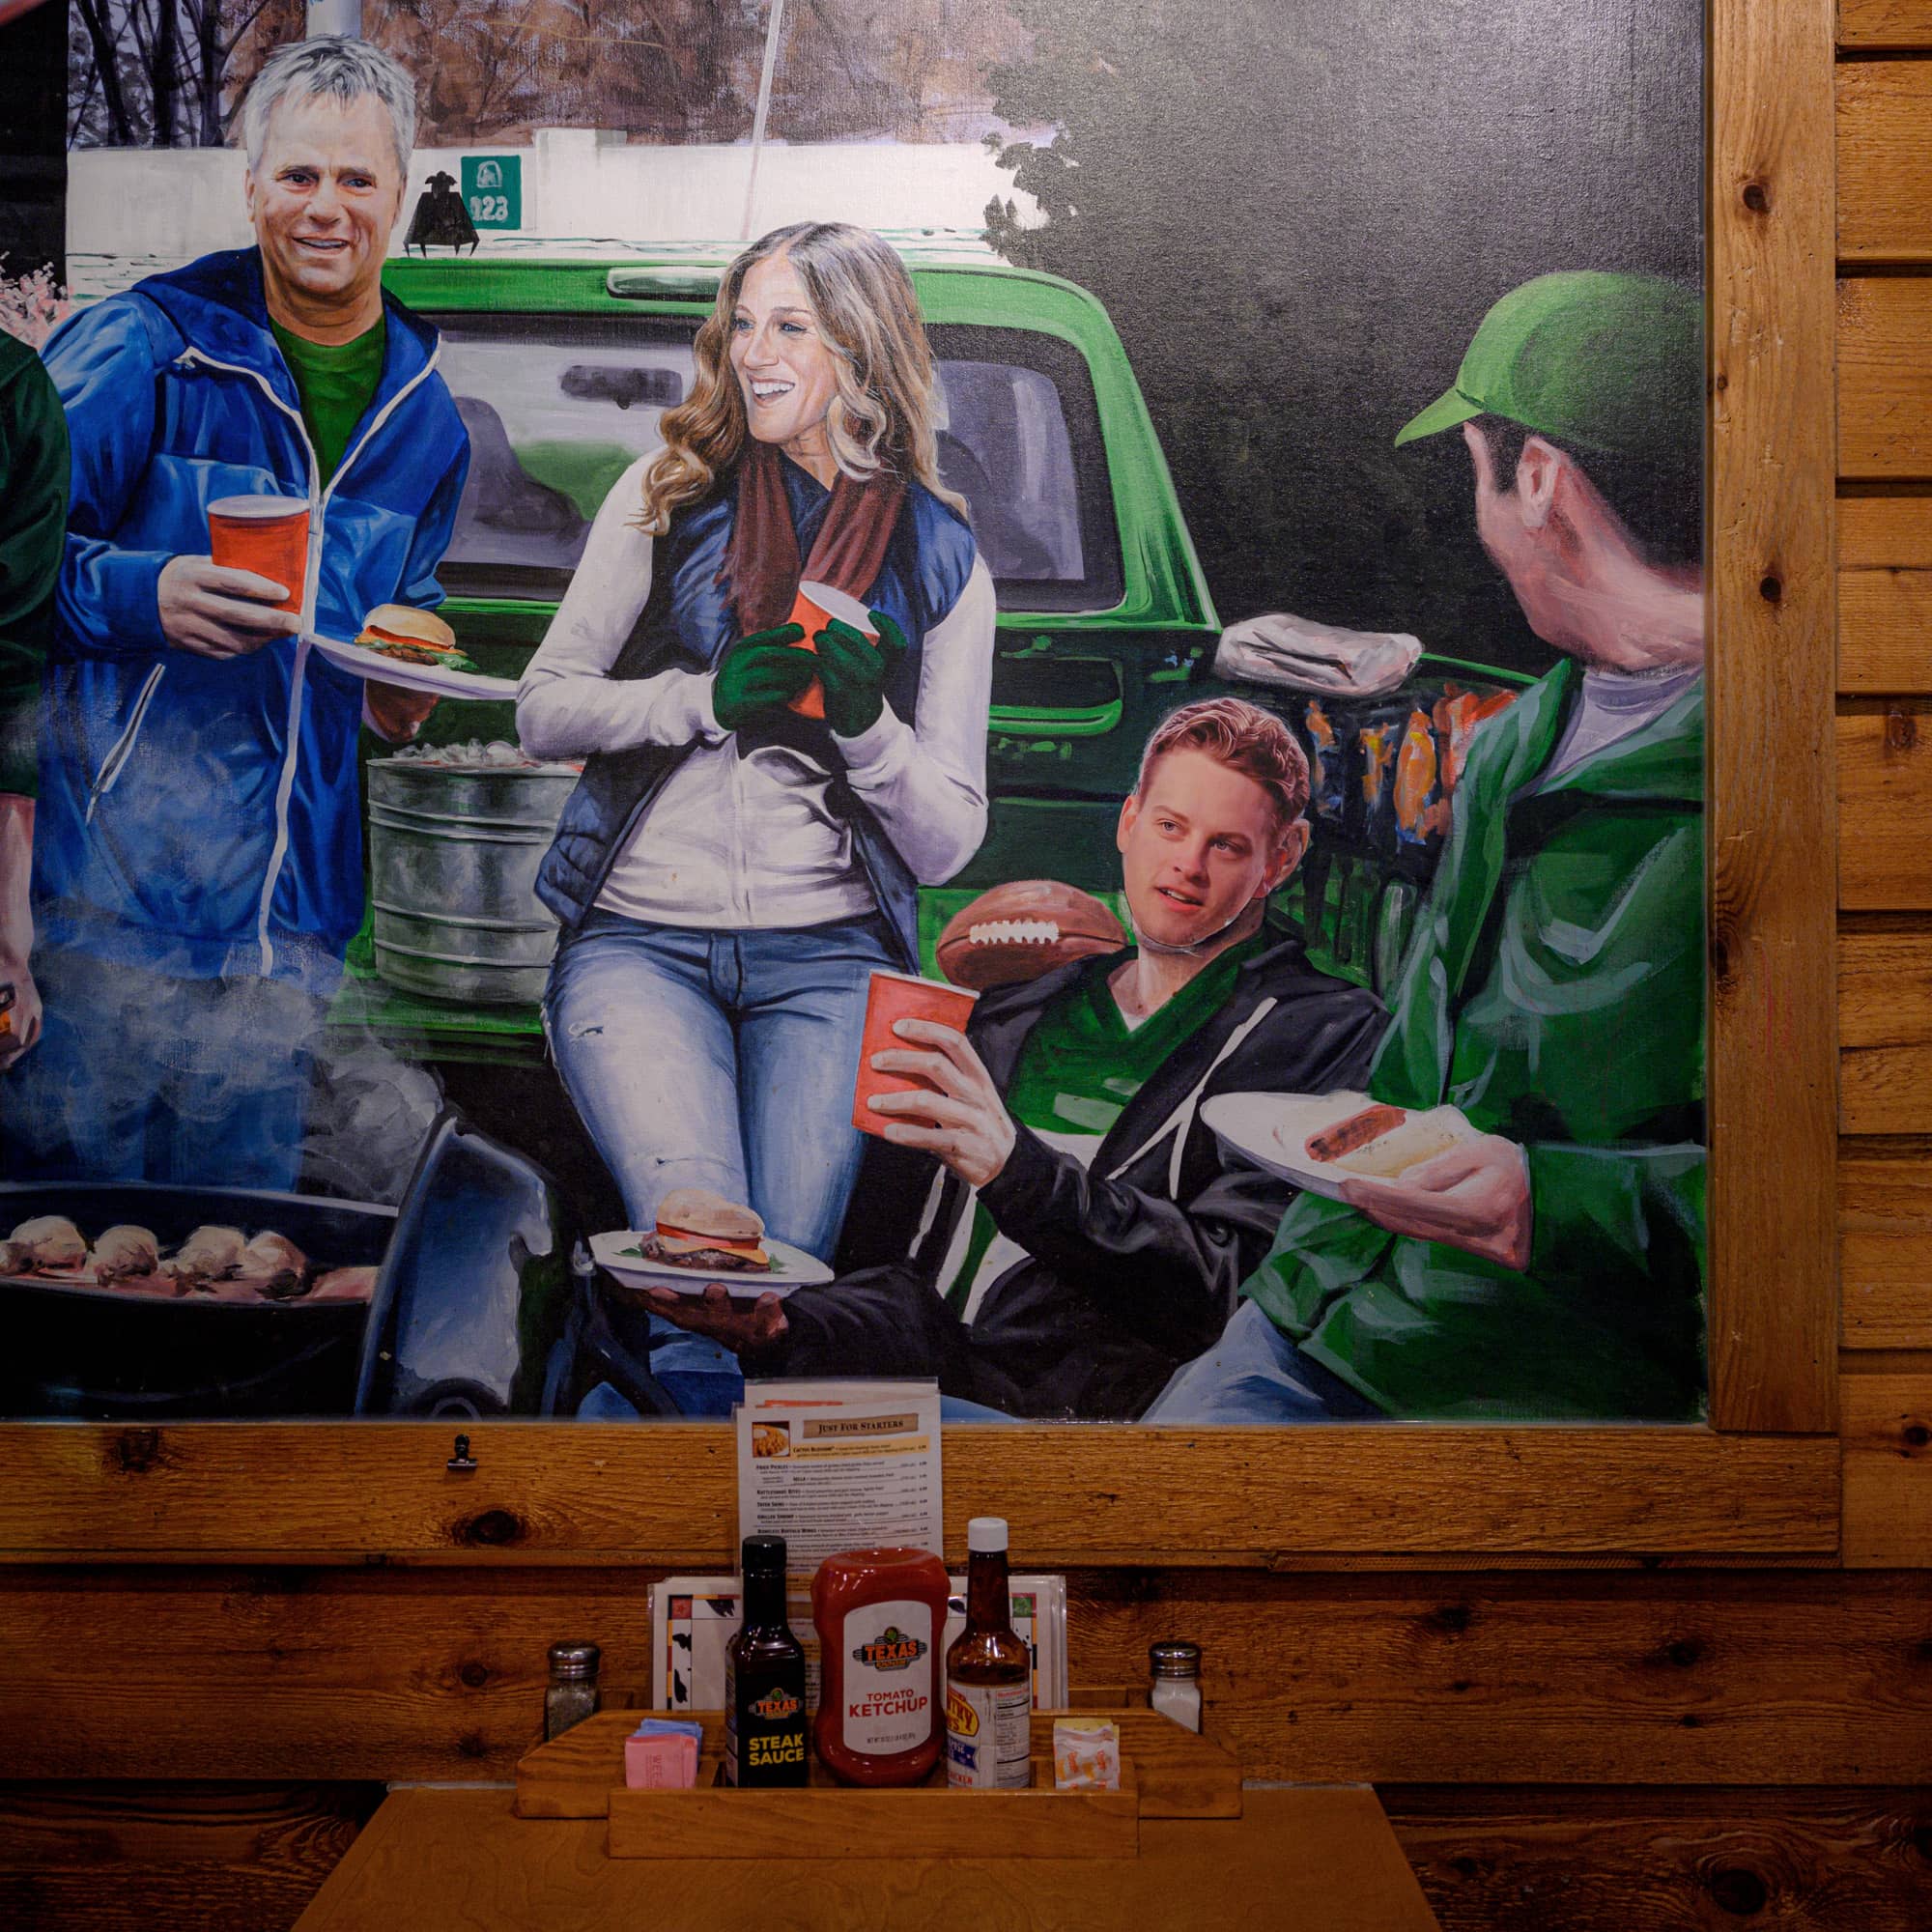 A mural at the Texas Roadhouse recognizing some of the famous people who have called Athens County home showcases an alteration that incorporates Joe Burrow into the cast of highlighted folks. Employees at the restaurant were not certain who modified the mural.